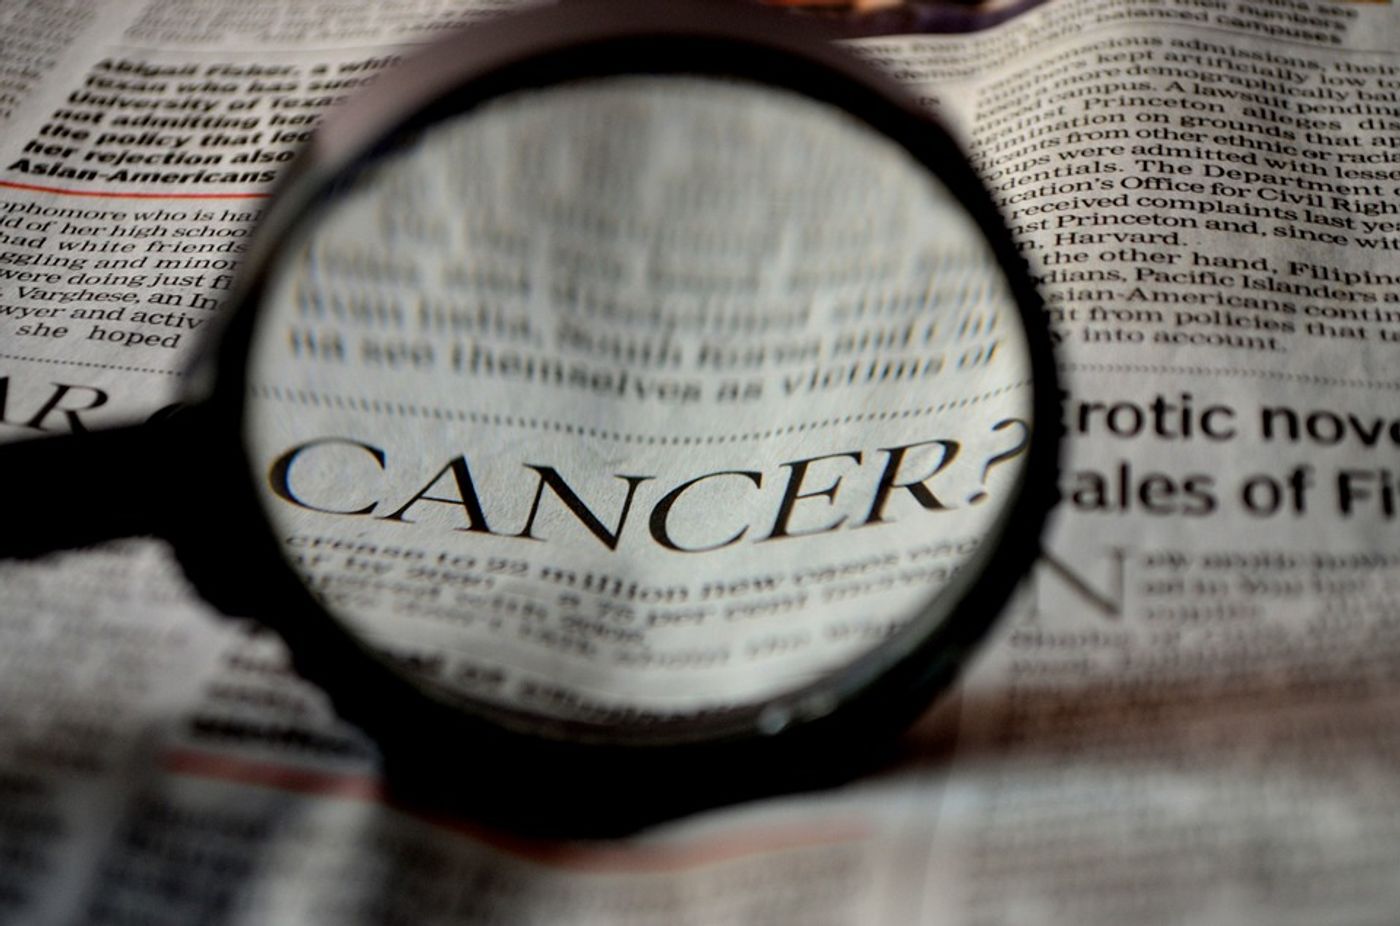 Cancer in newspaper image, credit: public domain